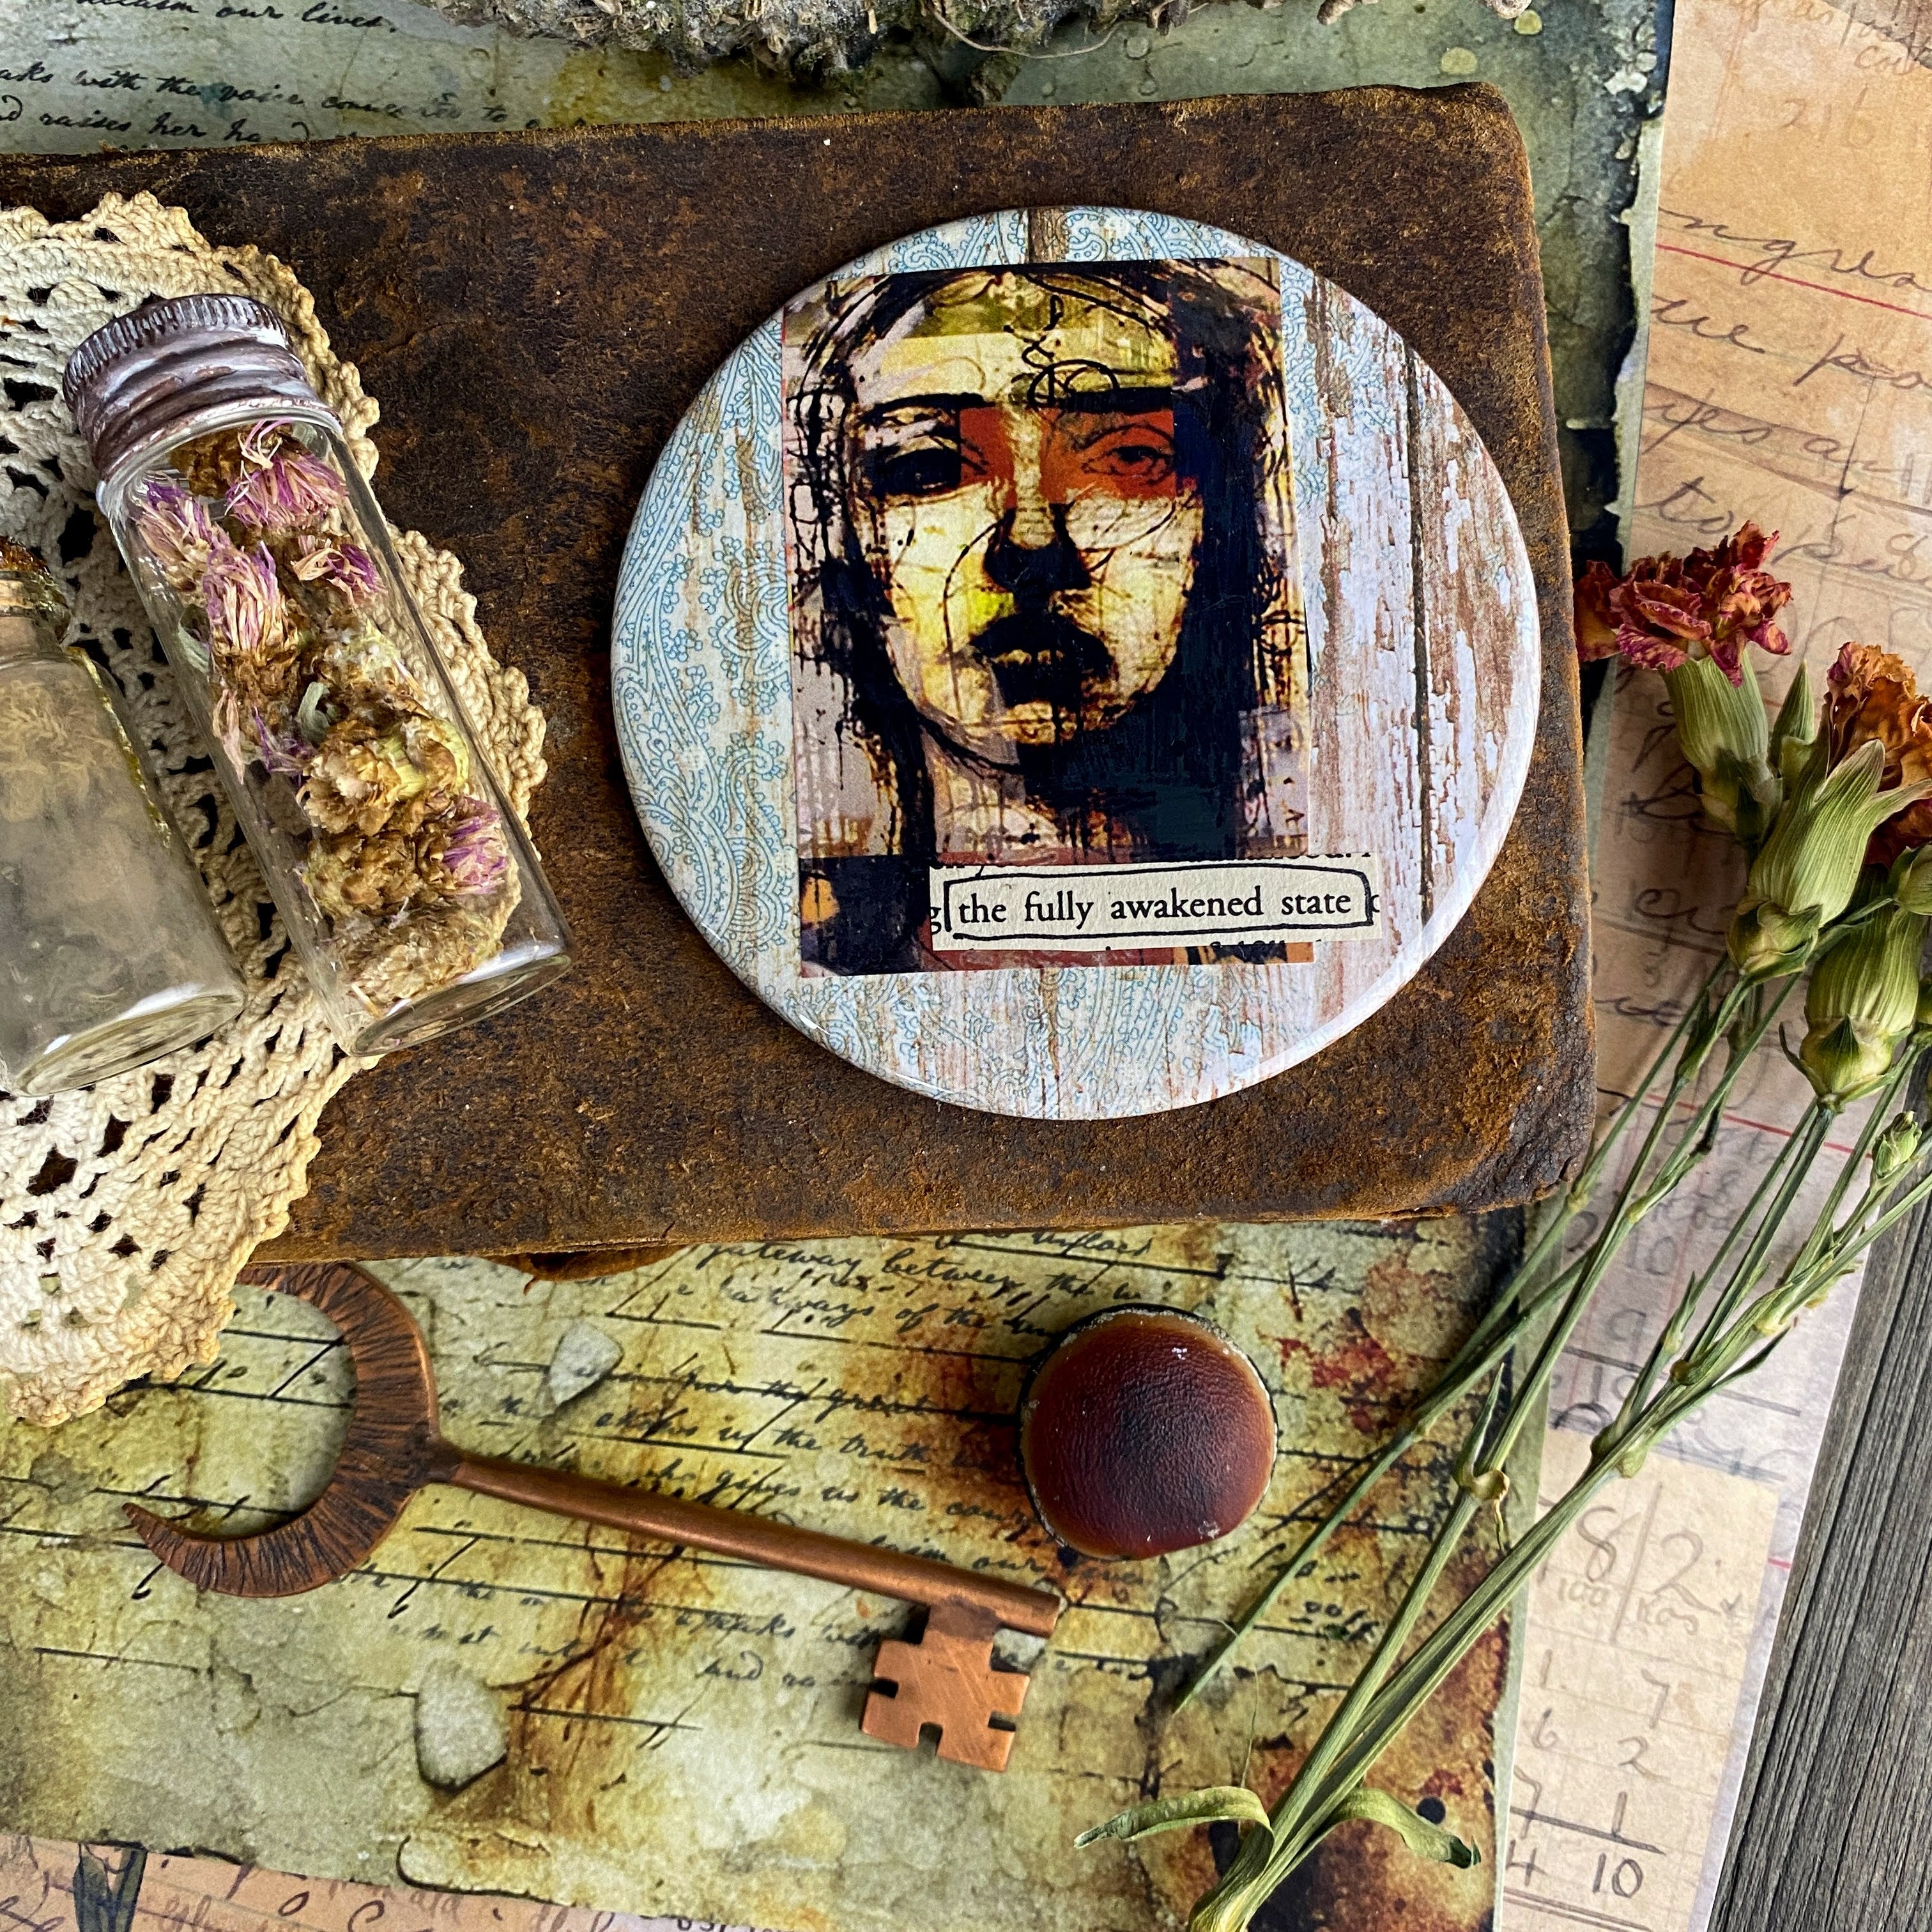 THE FULLY AWAKENED STATE - Hand Pressed Pocket Mirror with Original Collage Art